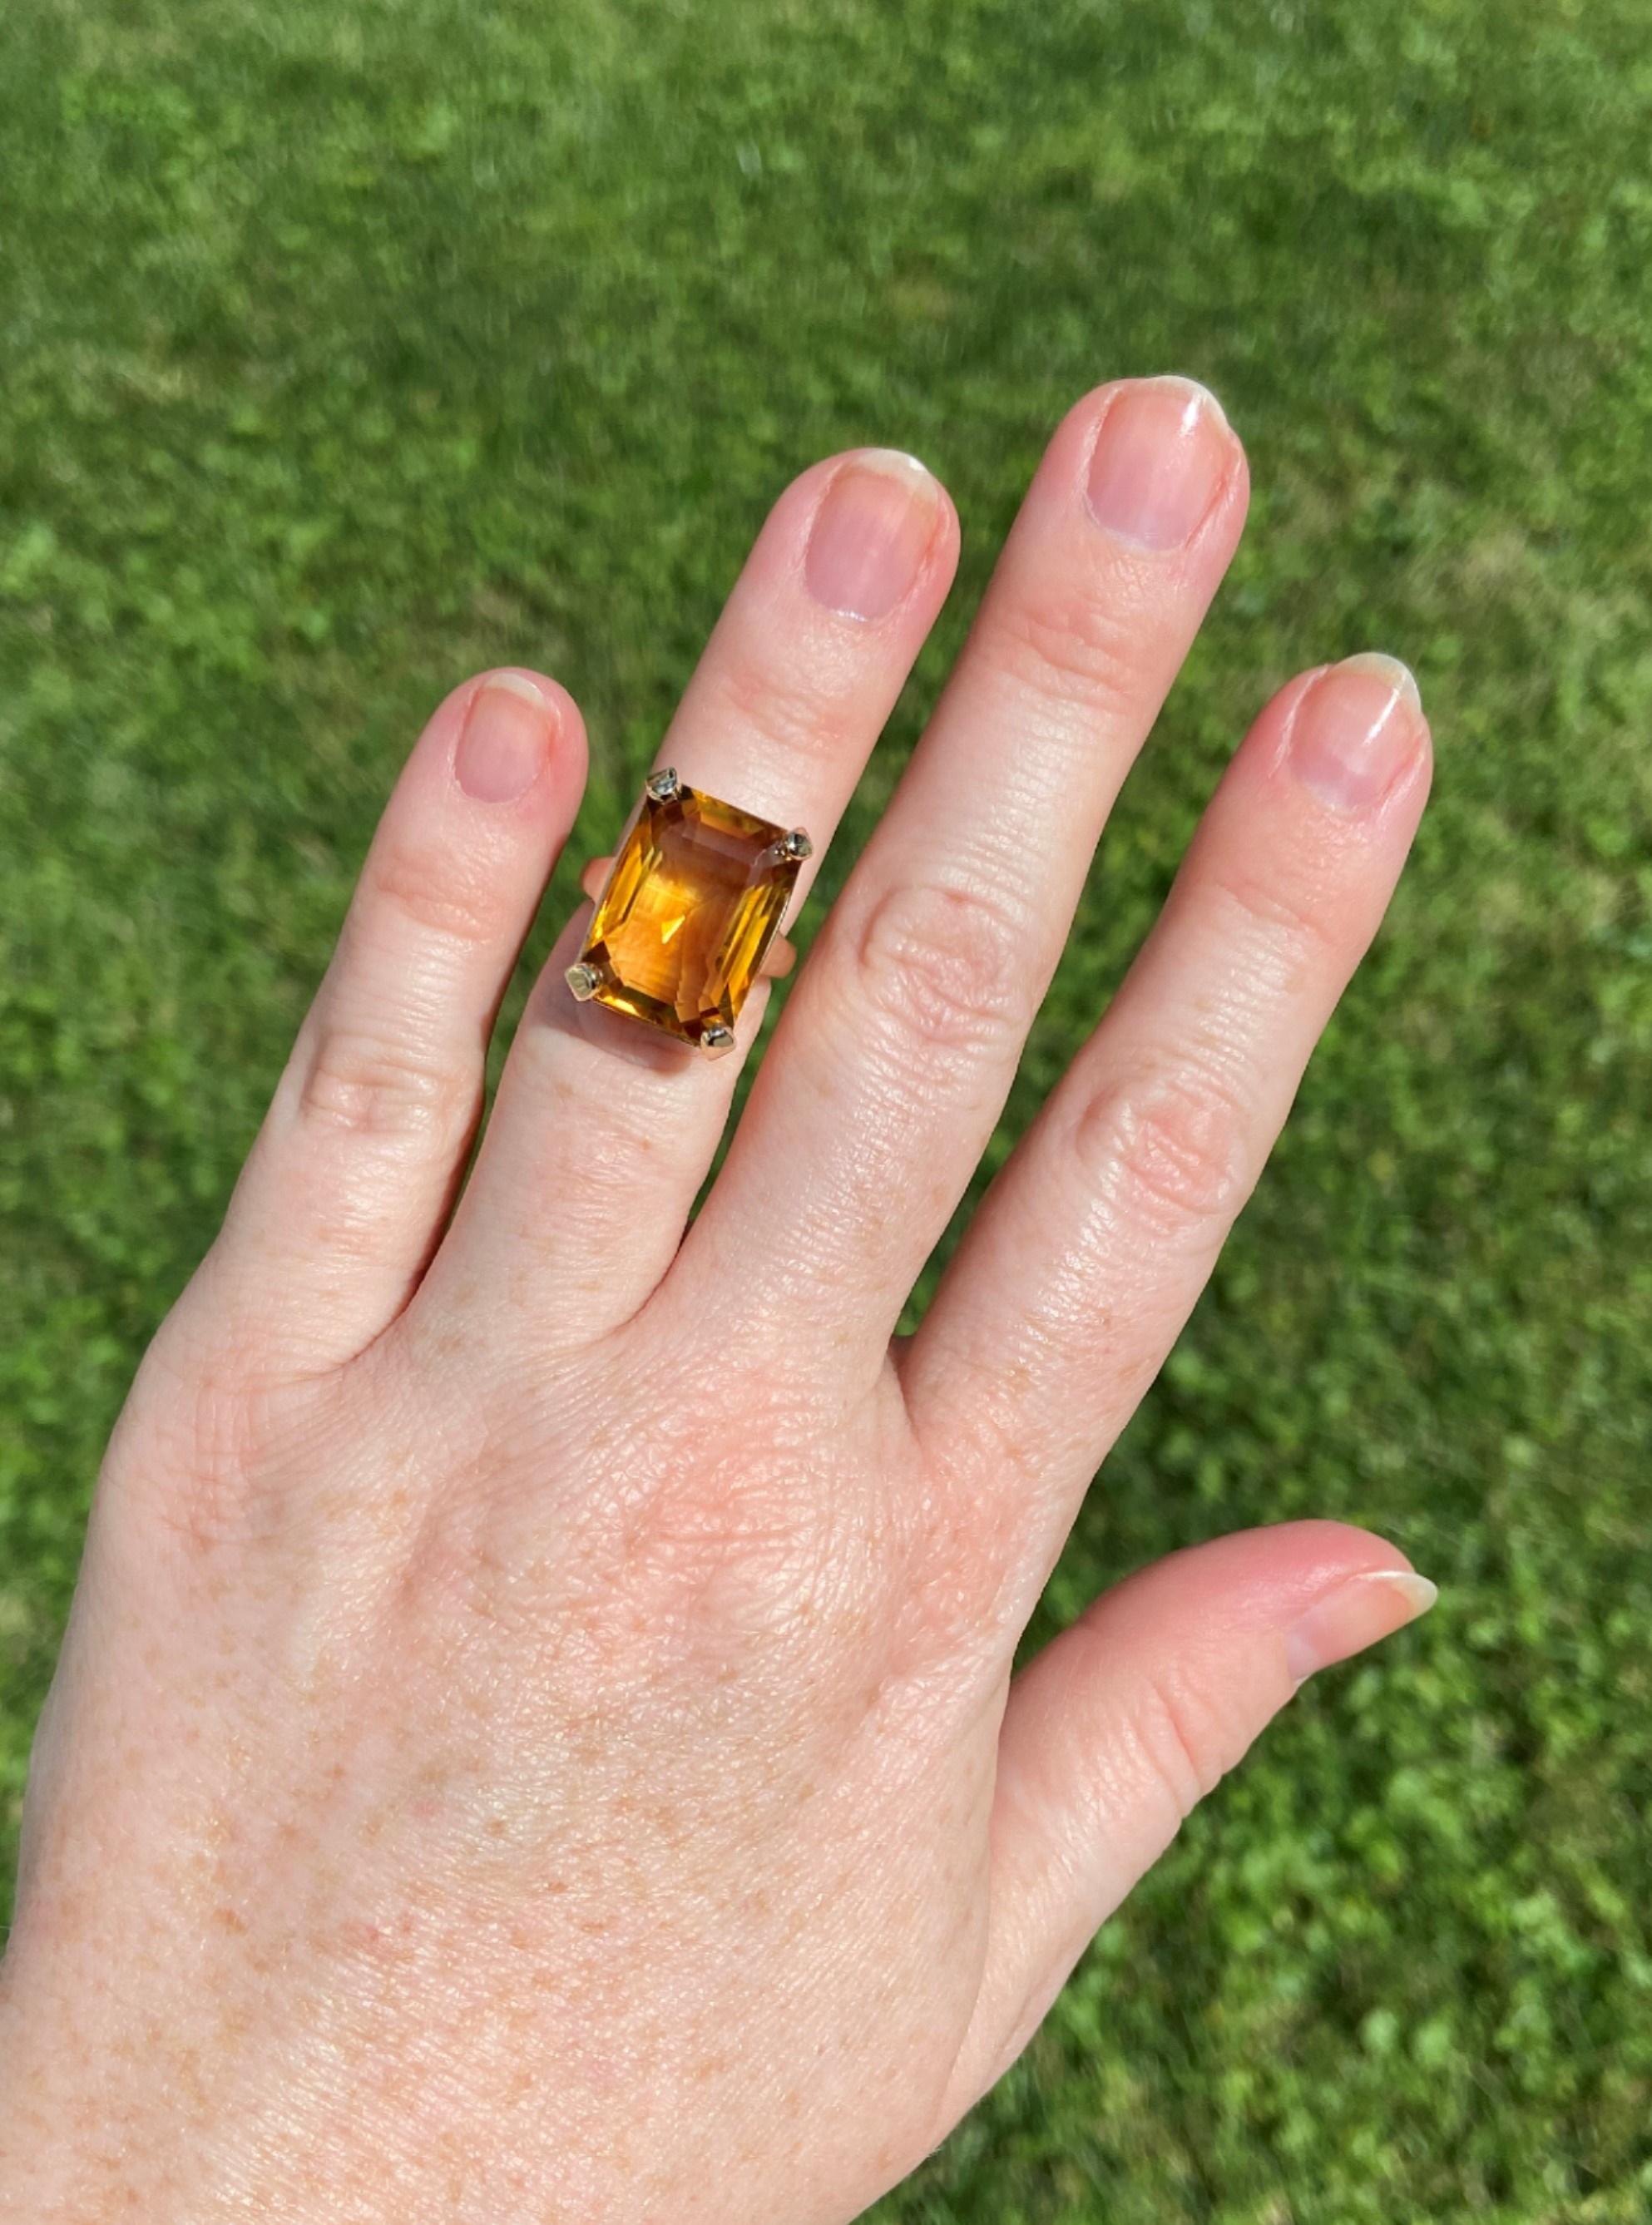 The centerpiece of this cocktail ring is a gorgeous golden honey colored emerald cut citrine. The clean lines of the citrine are enhanced by the simple geometry of the setting gallery, letting the citrine be the star of the show. If you stare into